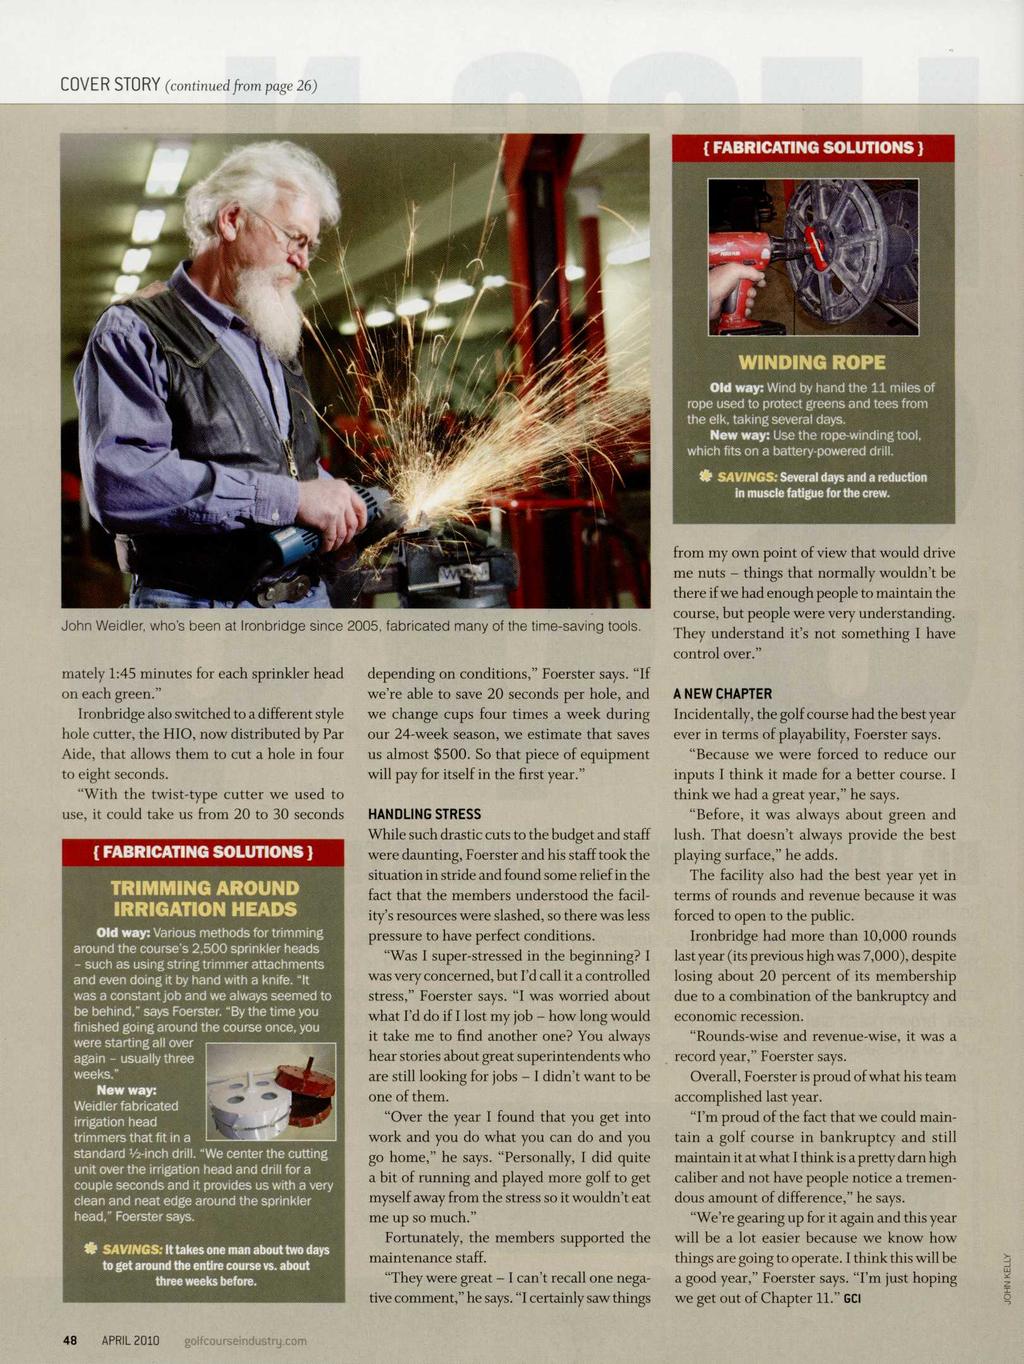 COVER STORY (continued from page 26) WINDING ROPE Old way: Wind by hand the 11 miles of rope used to protect greens and tees from the elk, taking several days.